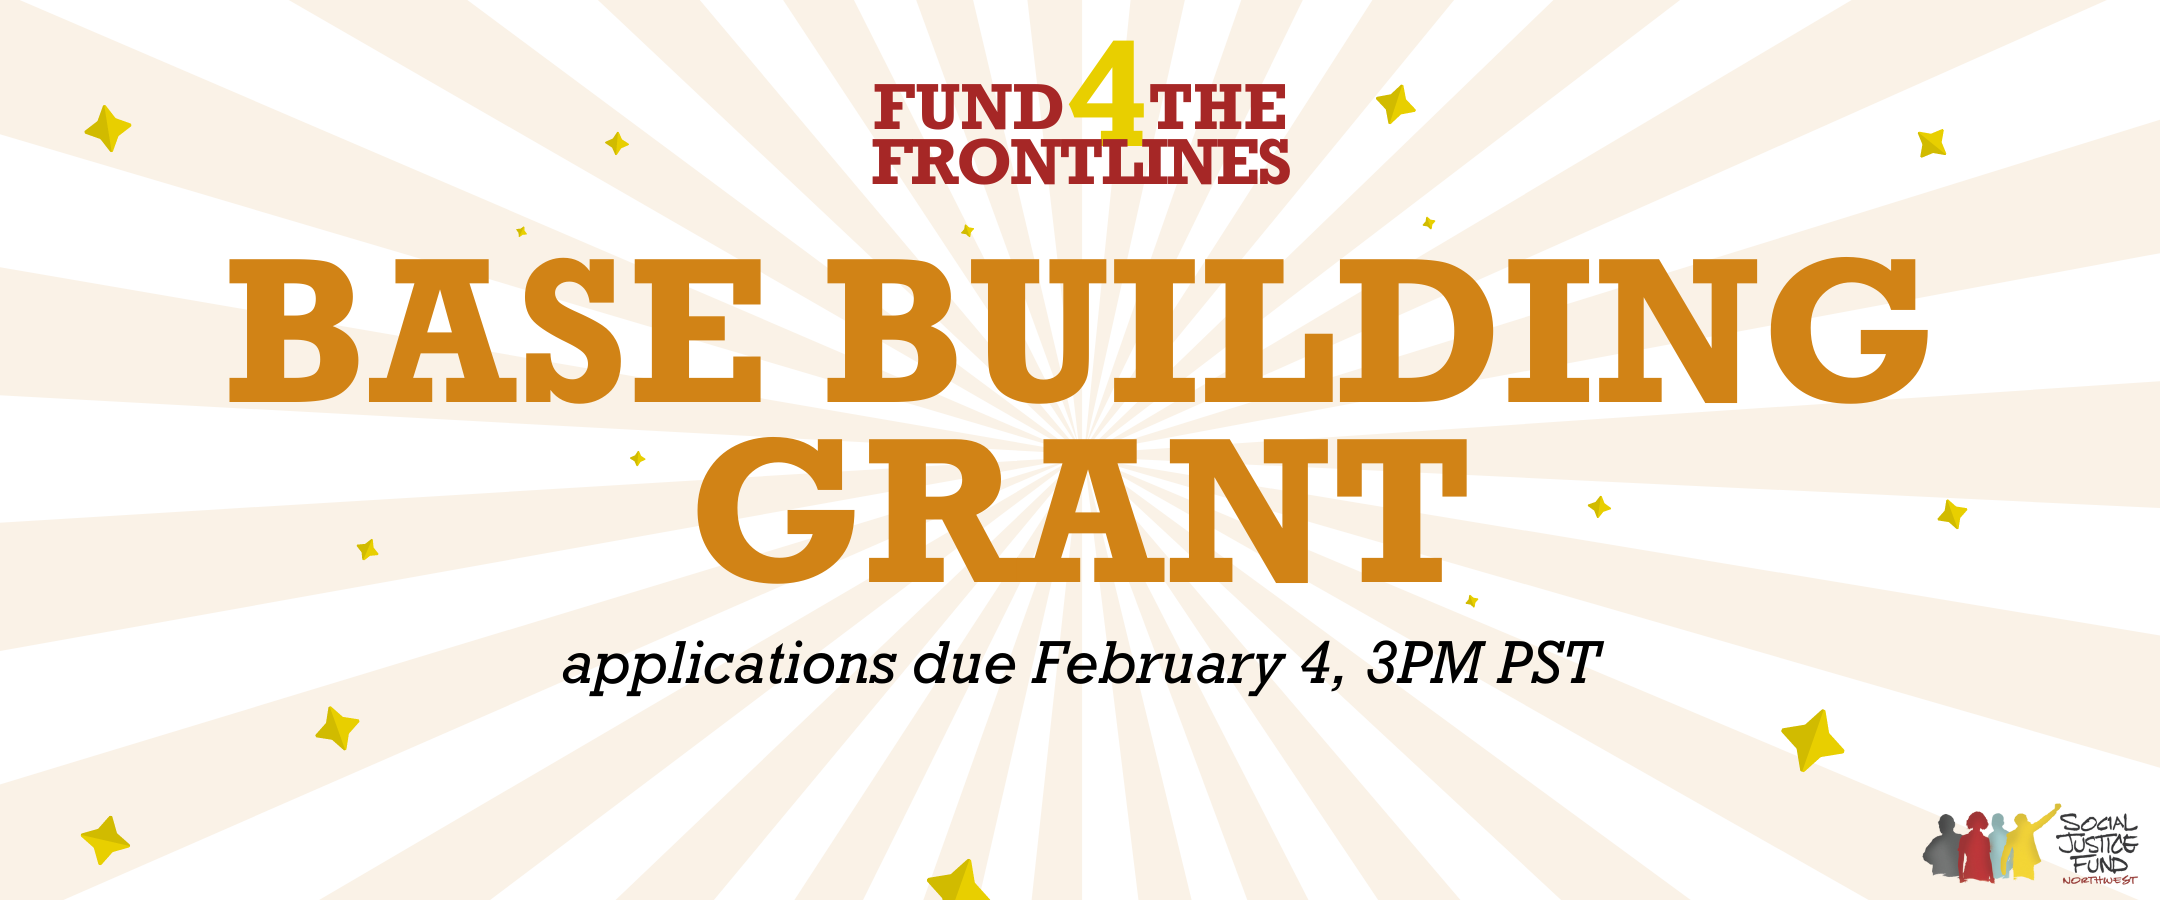 Rectangular banner with a light orange sunburst and little yellow stars radiating from center. Text reads Fund 4 the Frontlines Base Building Grant. Applications due February 4 3PM PST